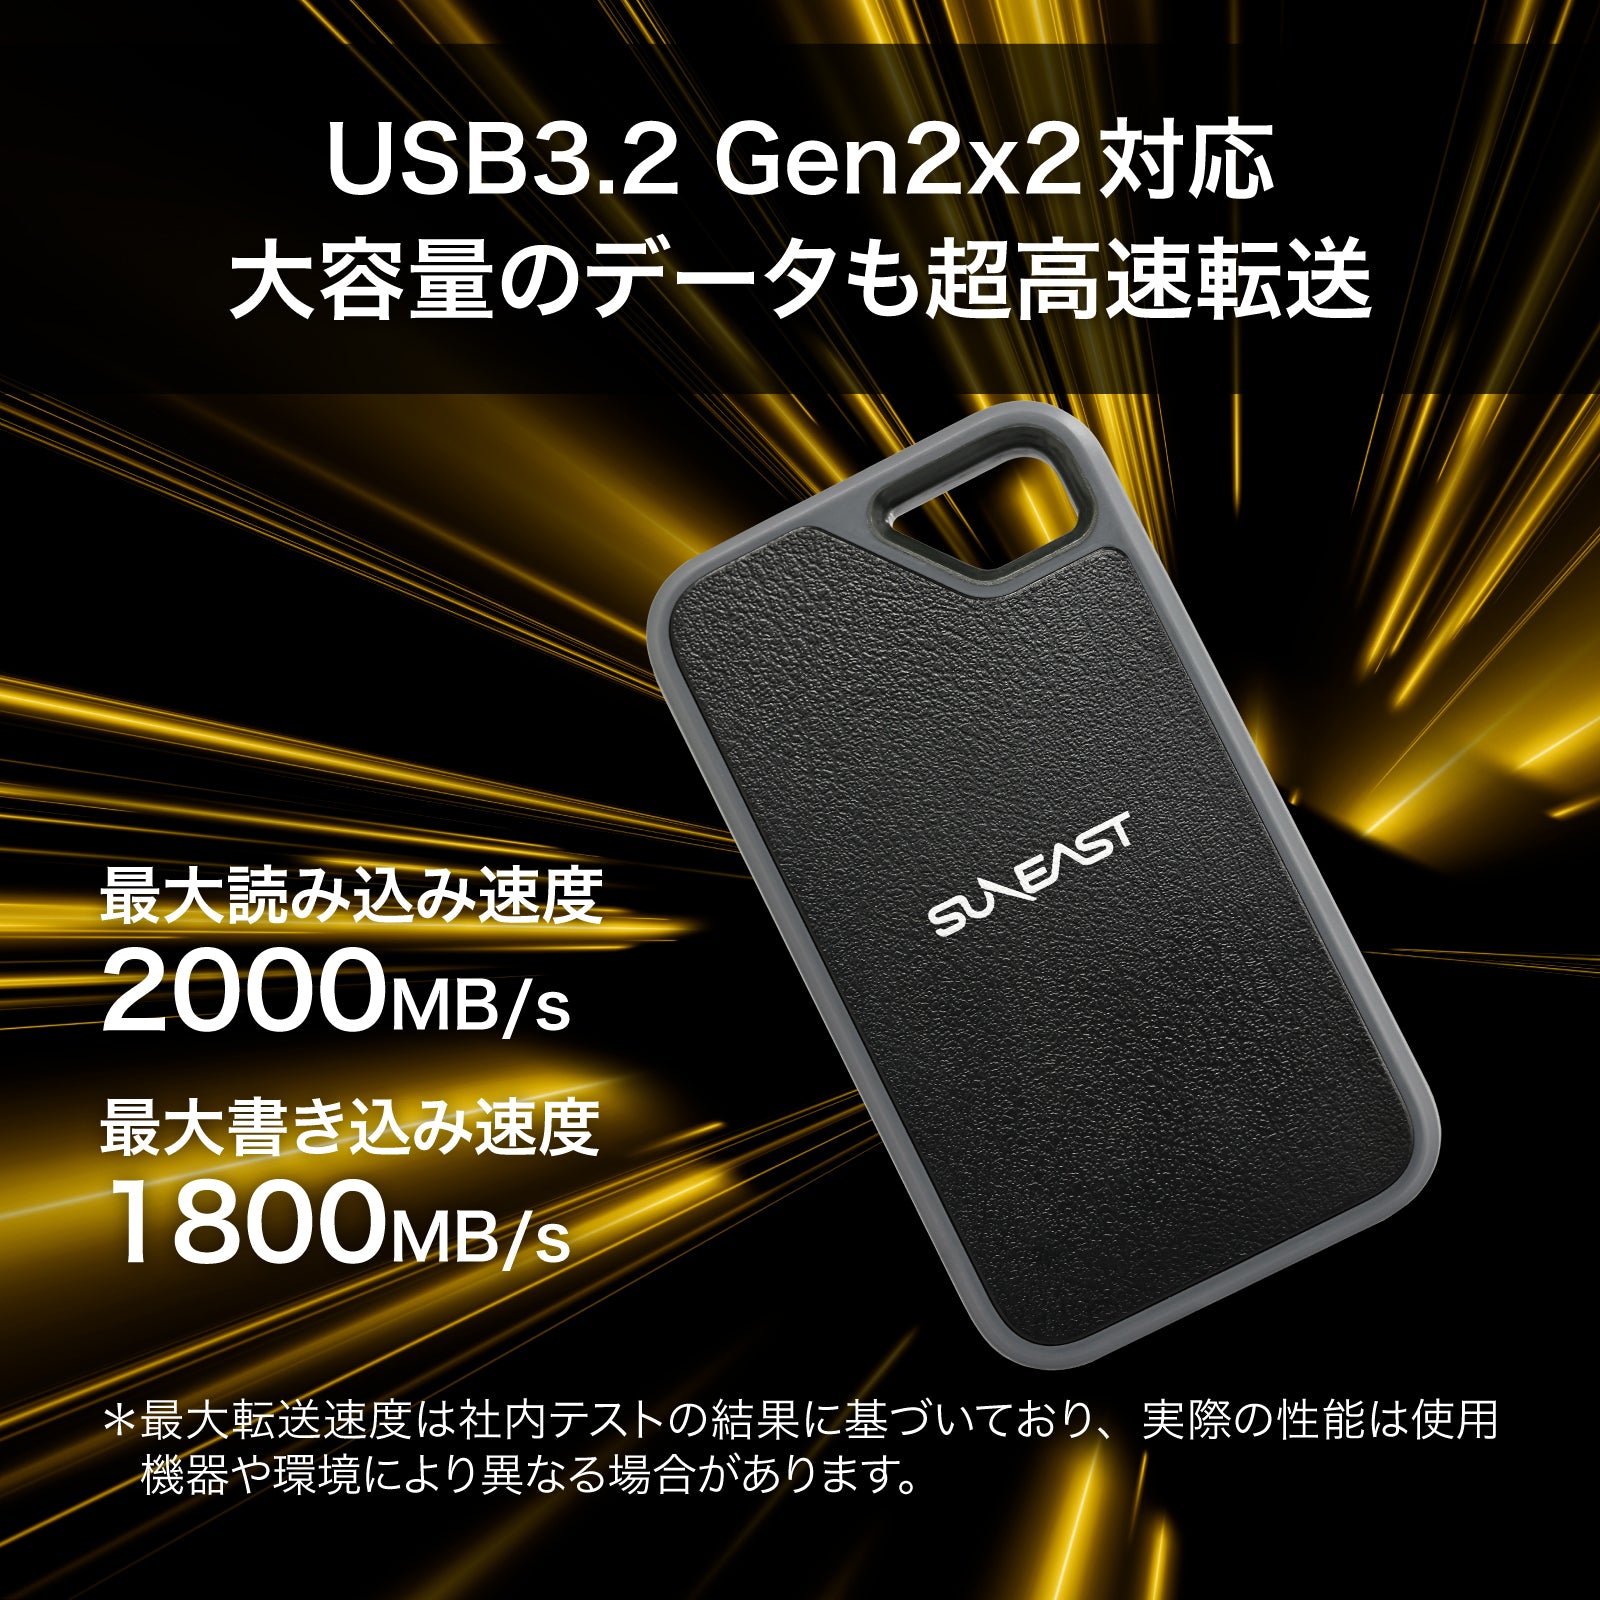 ULTIMATE PRO Portable SSD【GOLD Series】1TB - SUNEAST online store